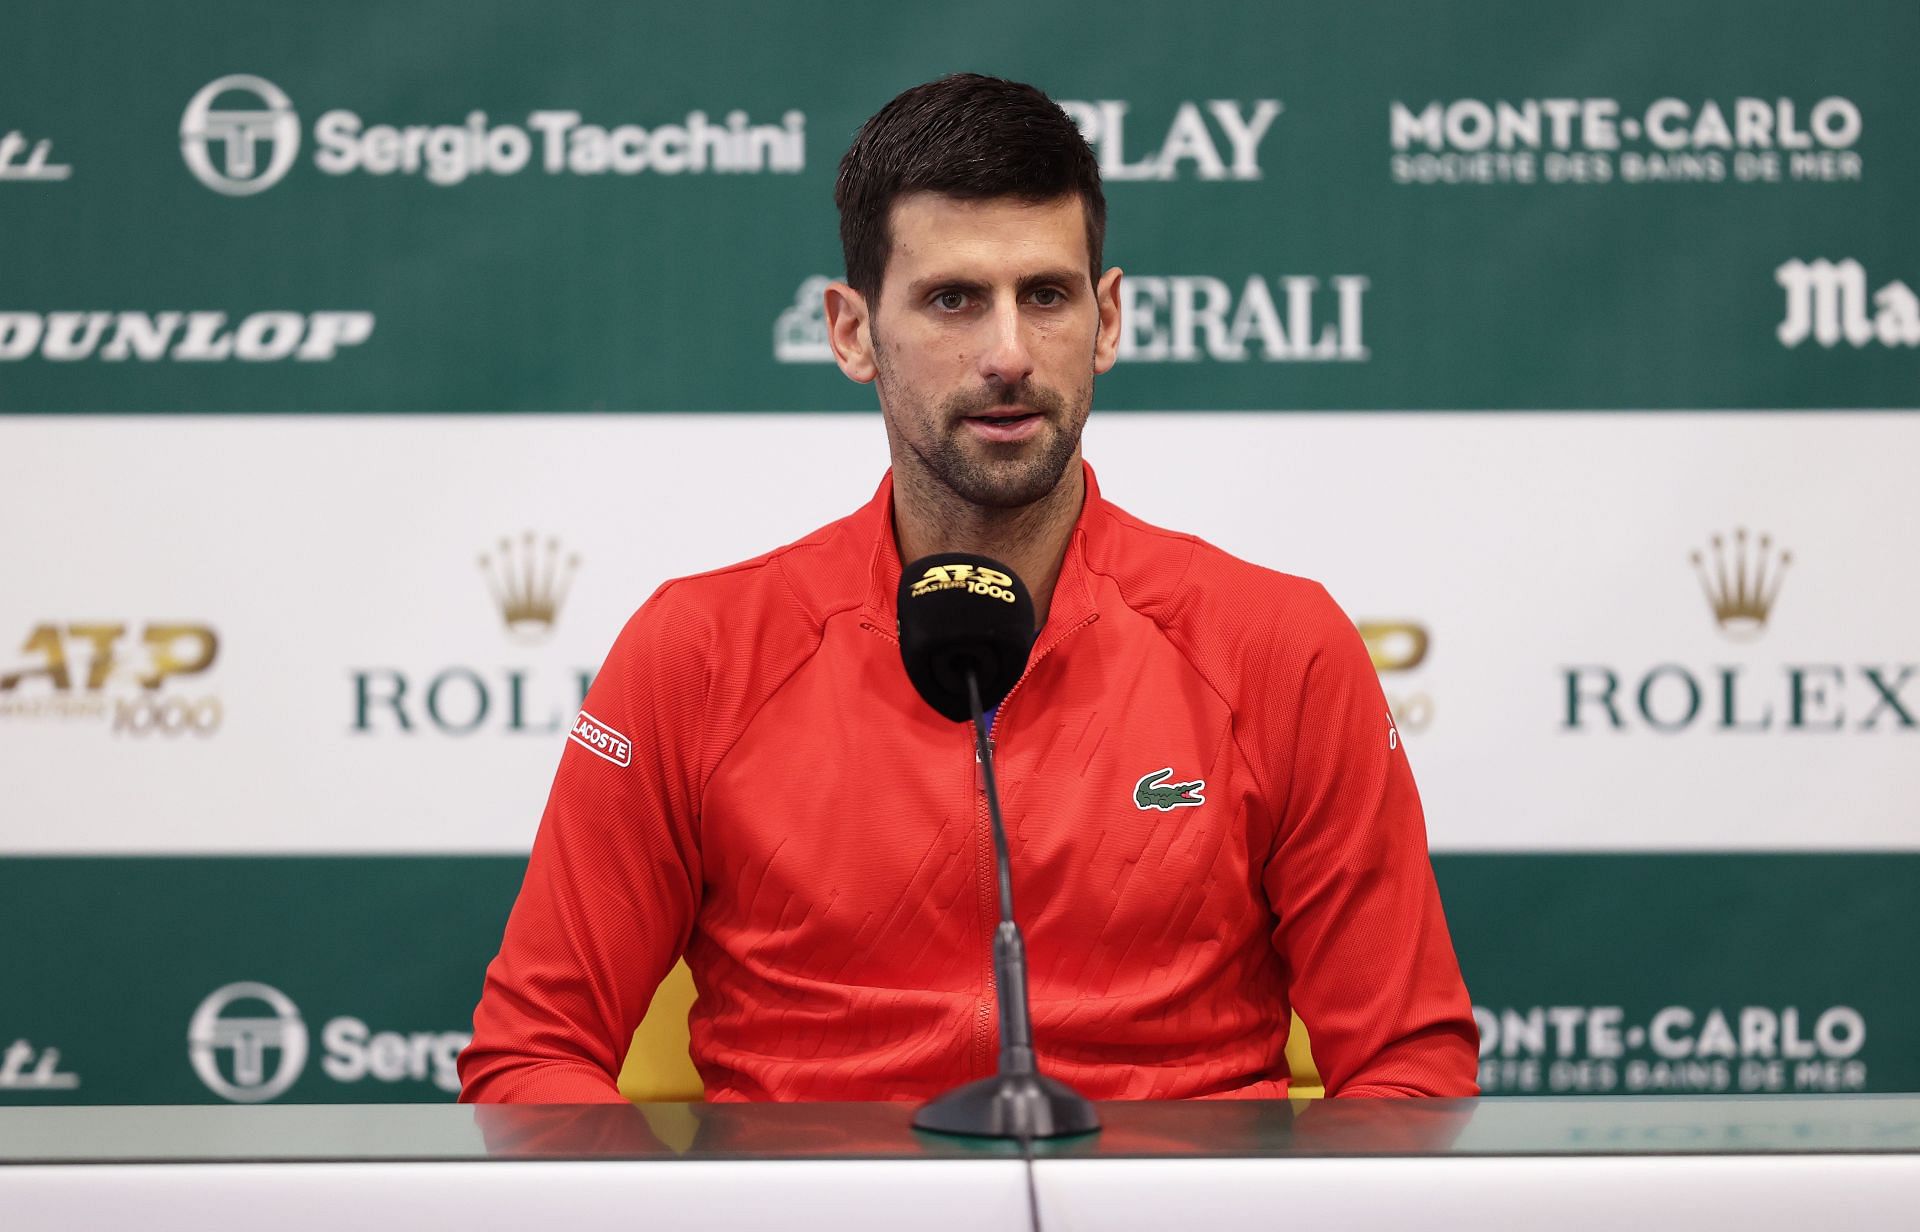 Novak Djokovic was firmly against Wimbledon&#039;s decision to ban Russian and Belarusian athletes